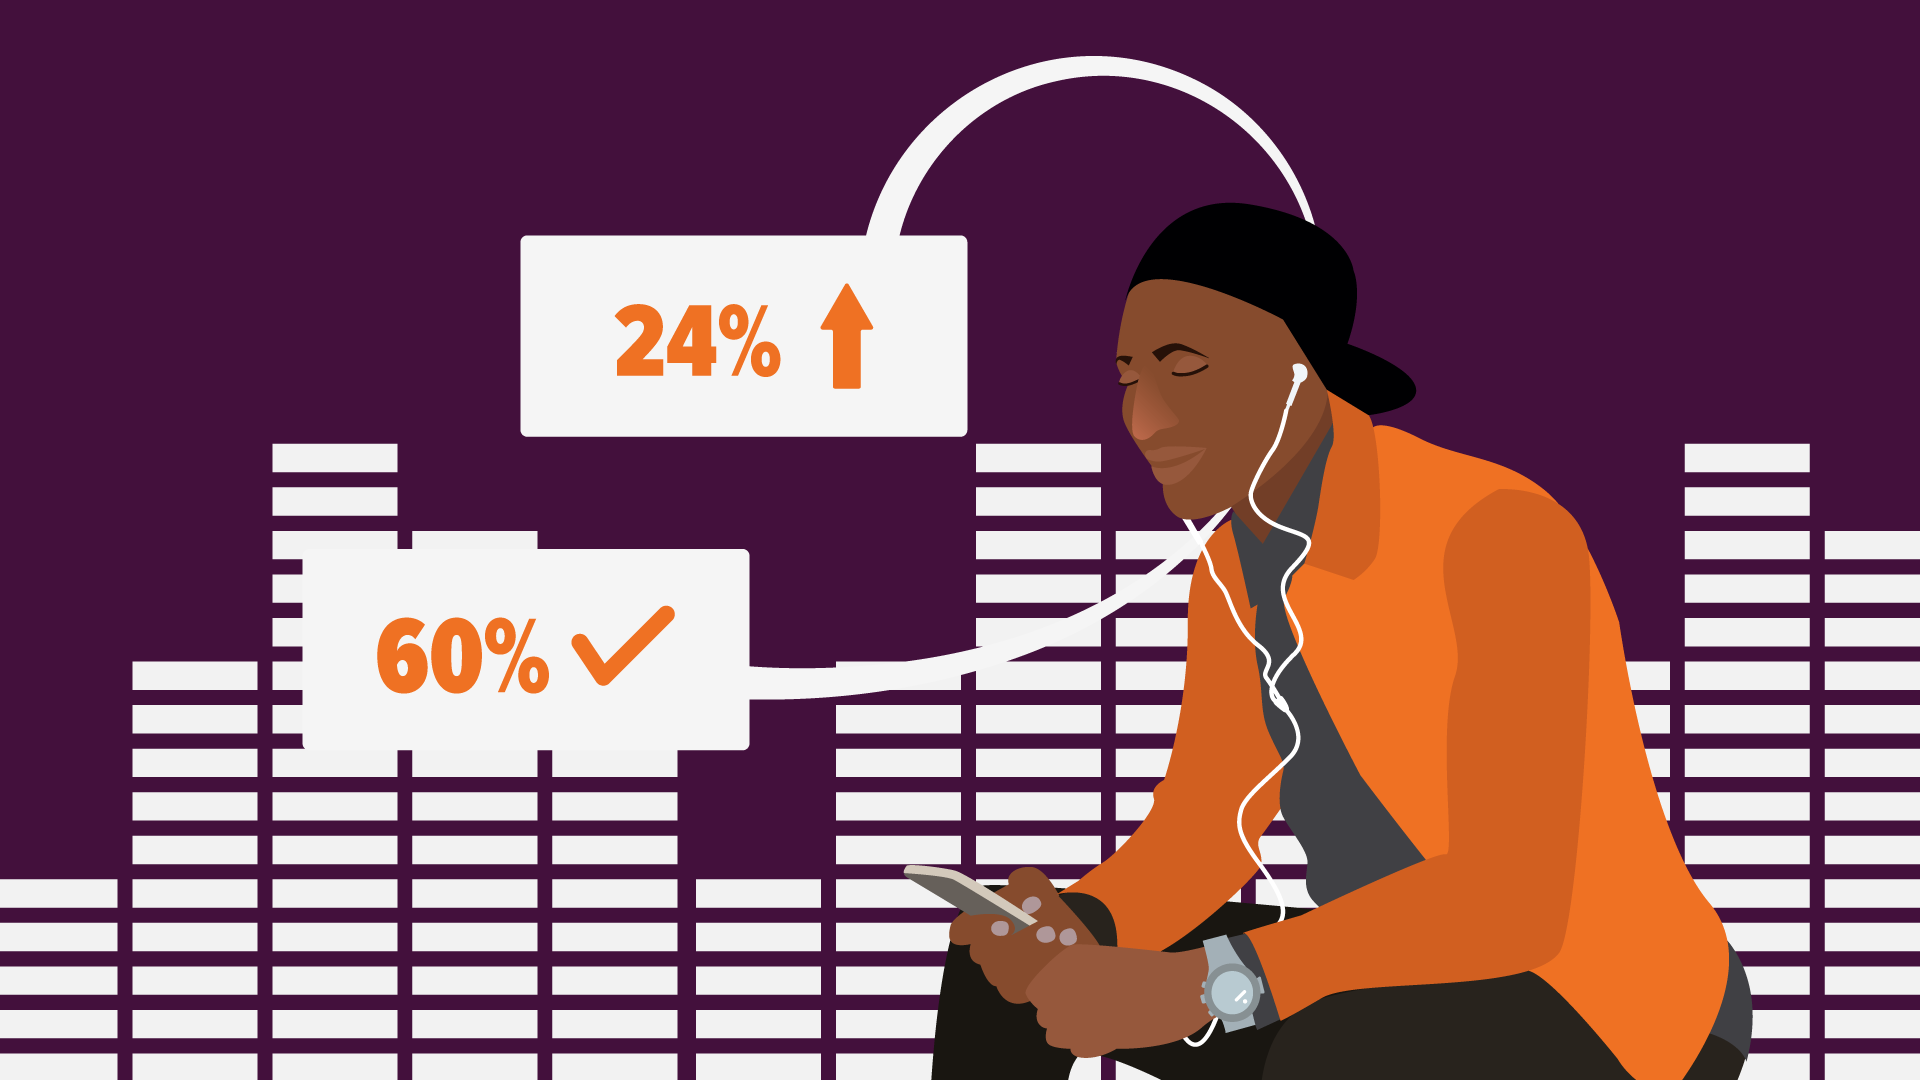 illustration of Statistics of buyers influenced by audio